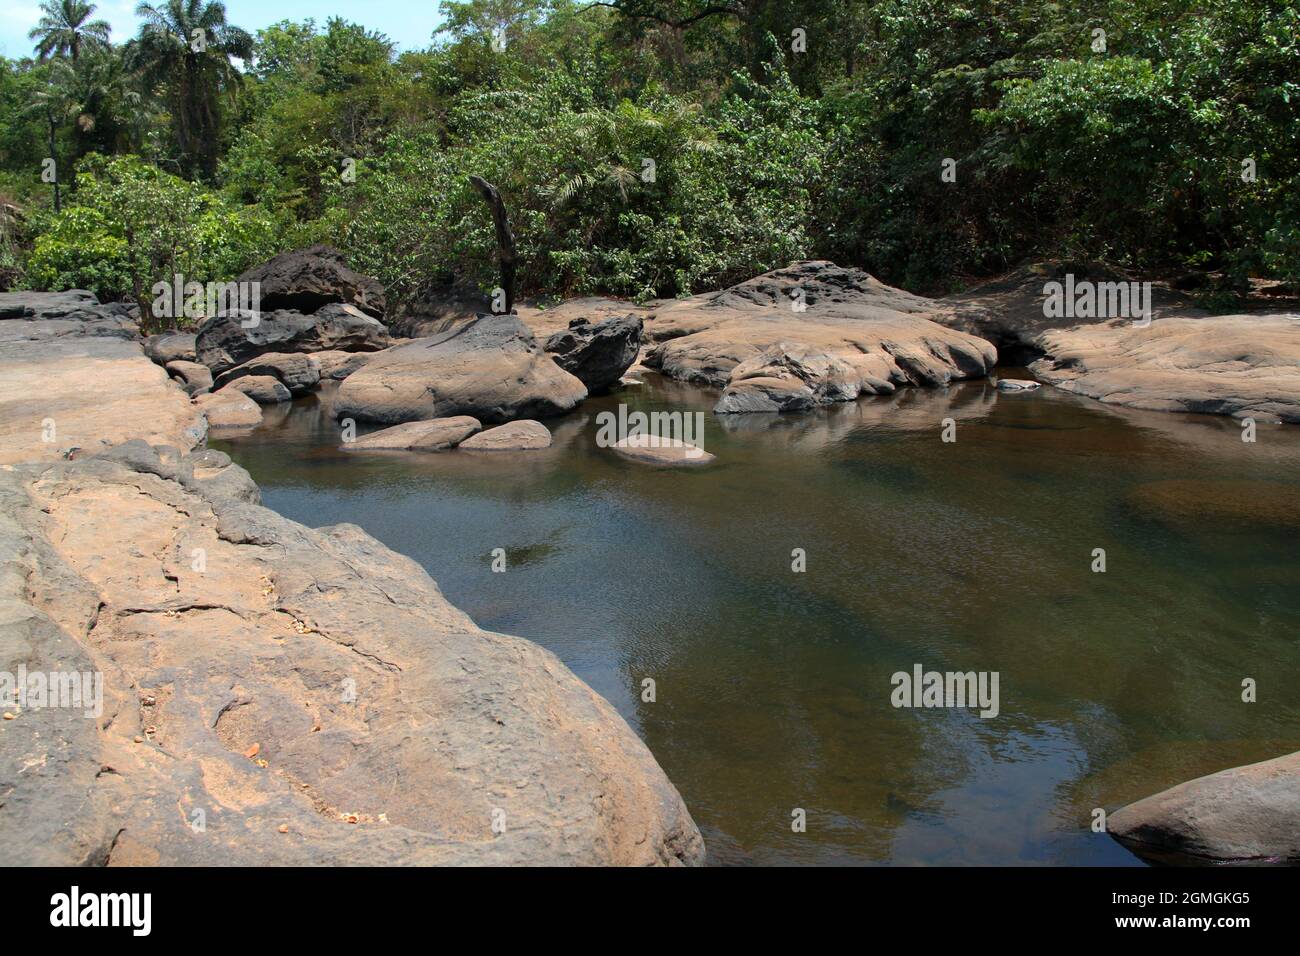 A pond of stream fed clear, warm  water, surrounded by large rocks and trees in inland Guinea, West Africa, on a sunny day. Stock Photo